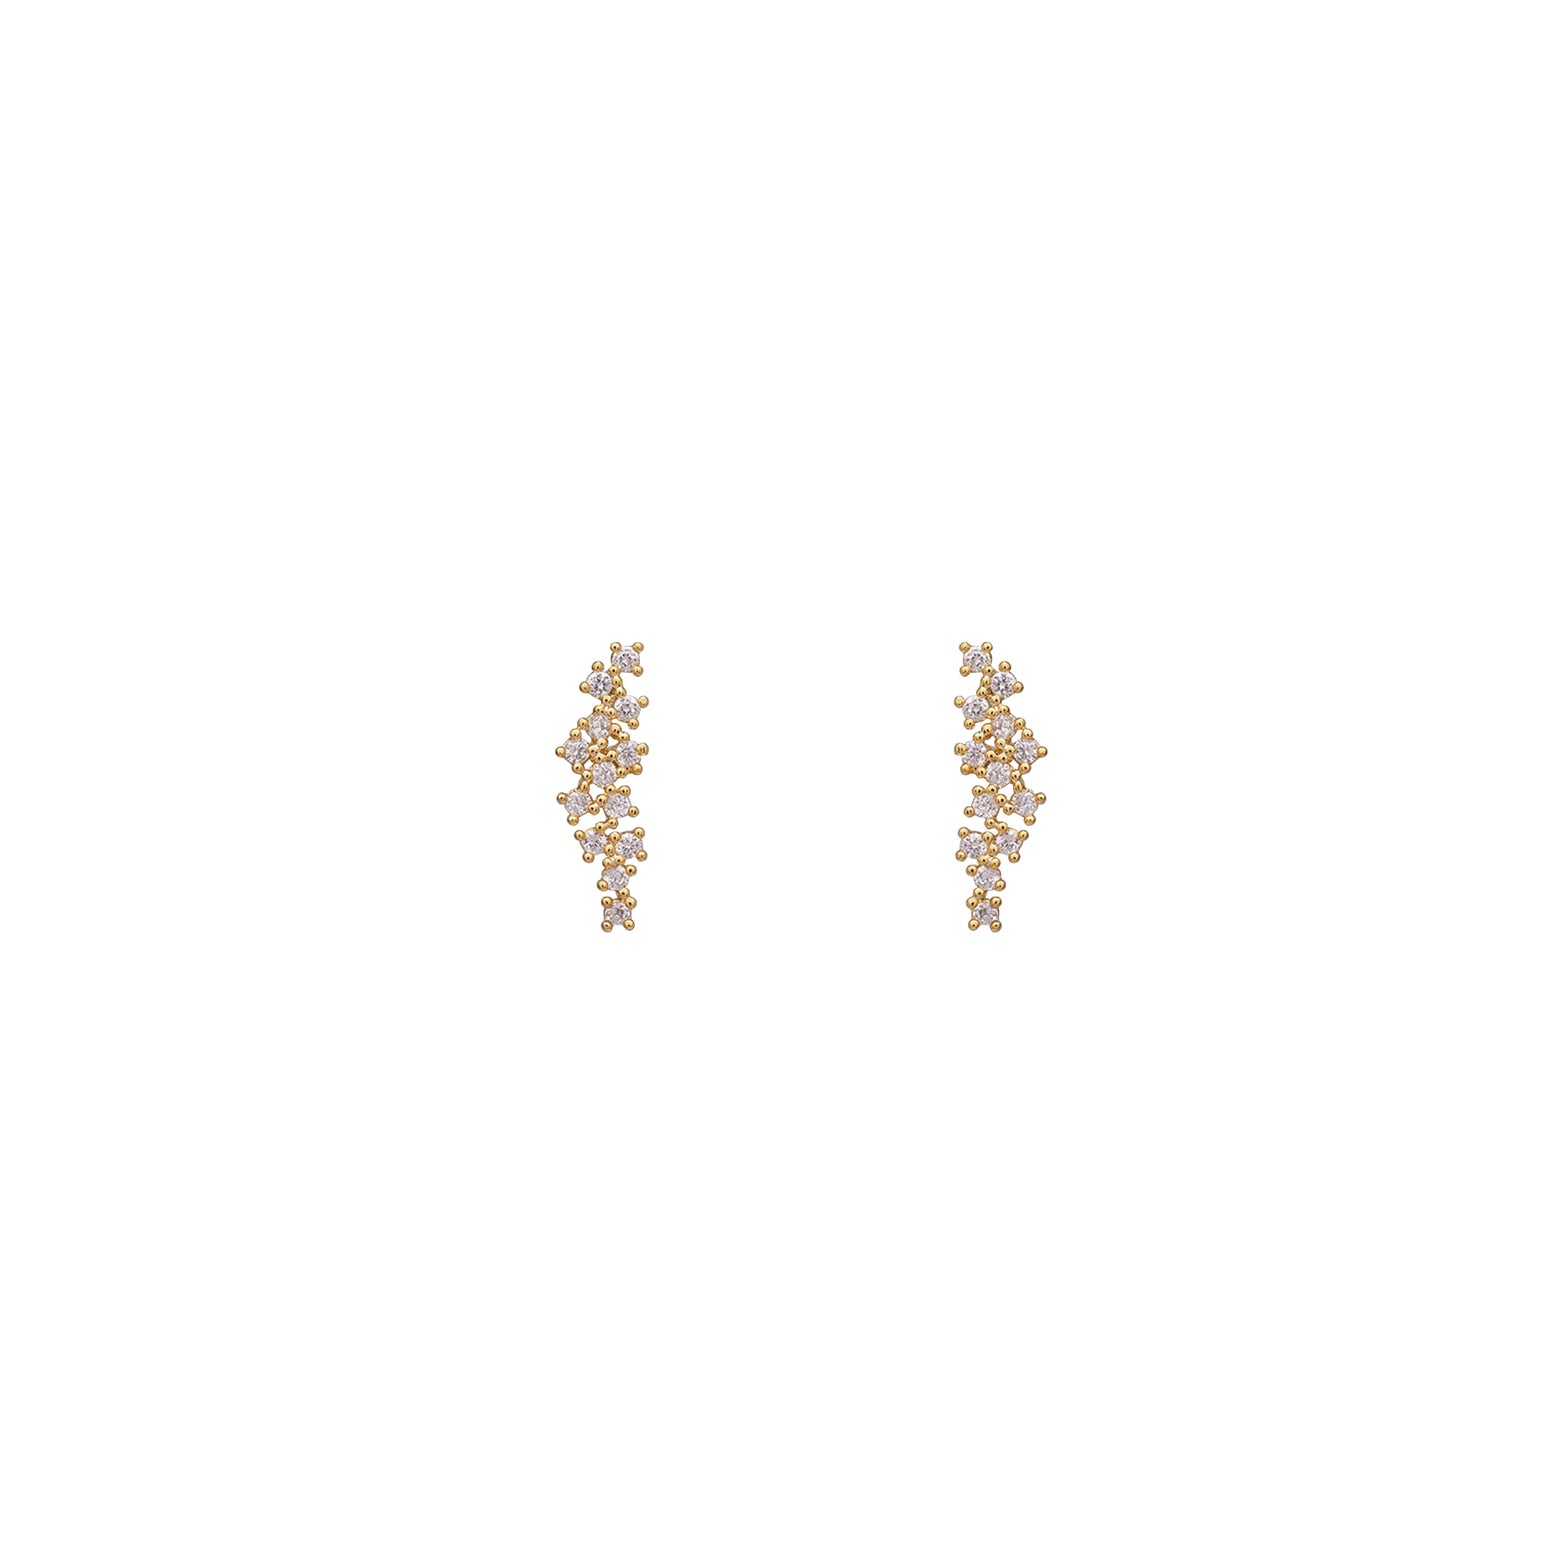 Gold constellation earrings